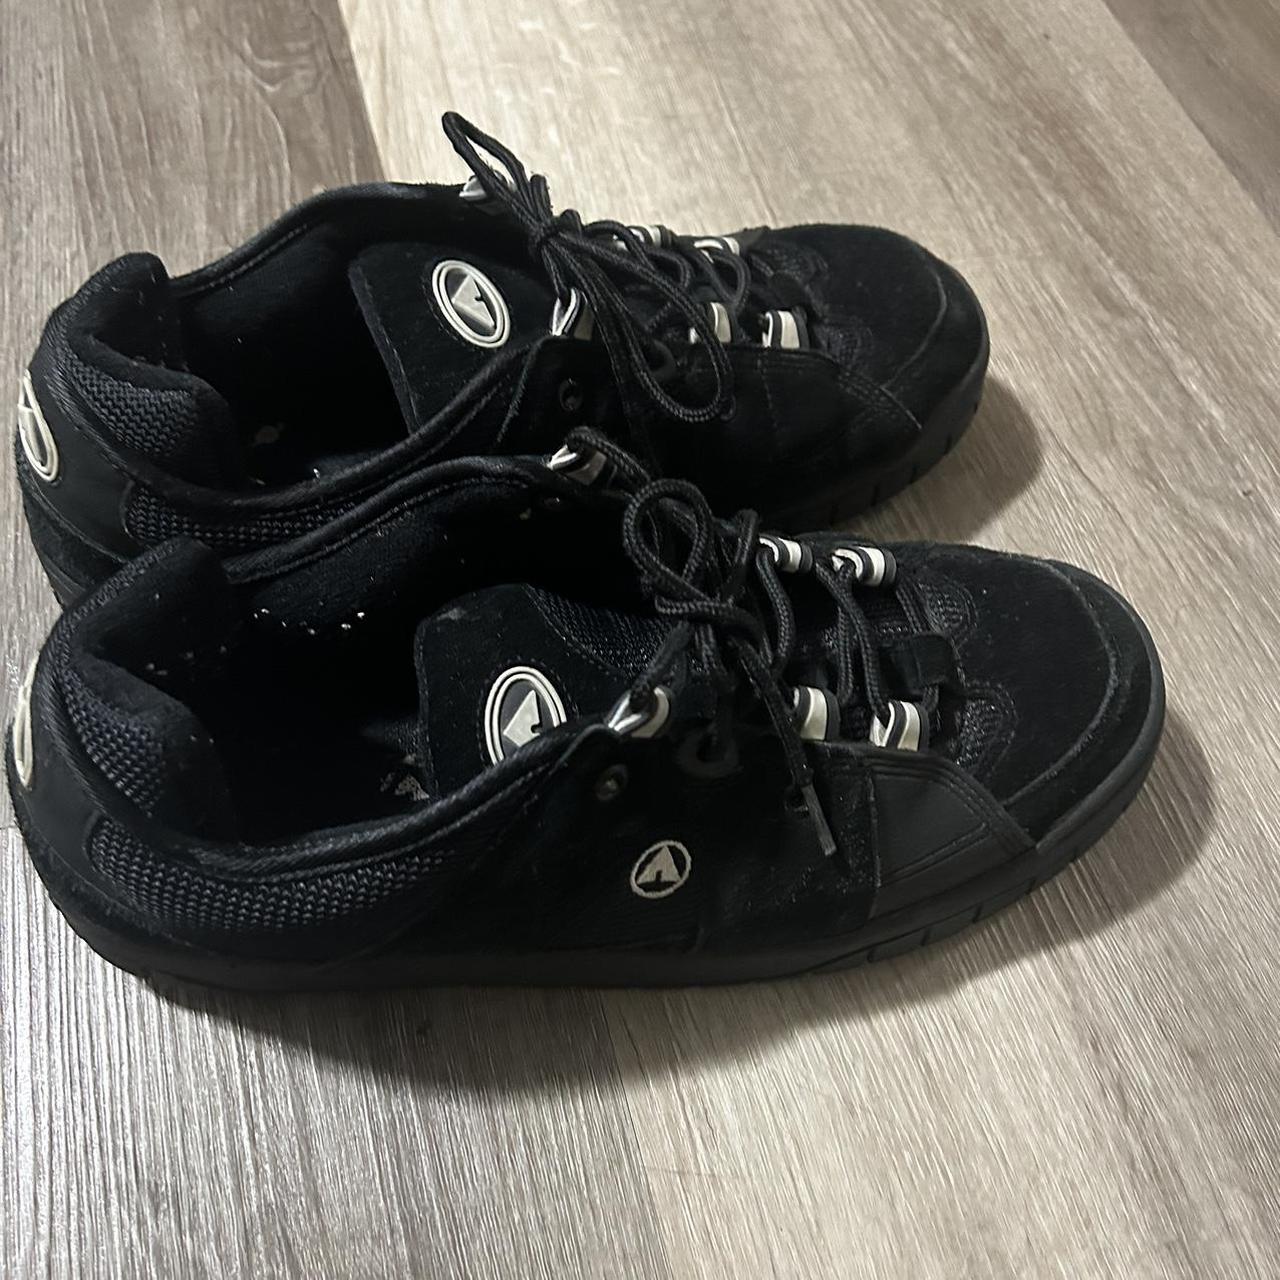 WARRIOR sneakers (chinese) worn maybe 3 times. - Depop